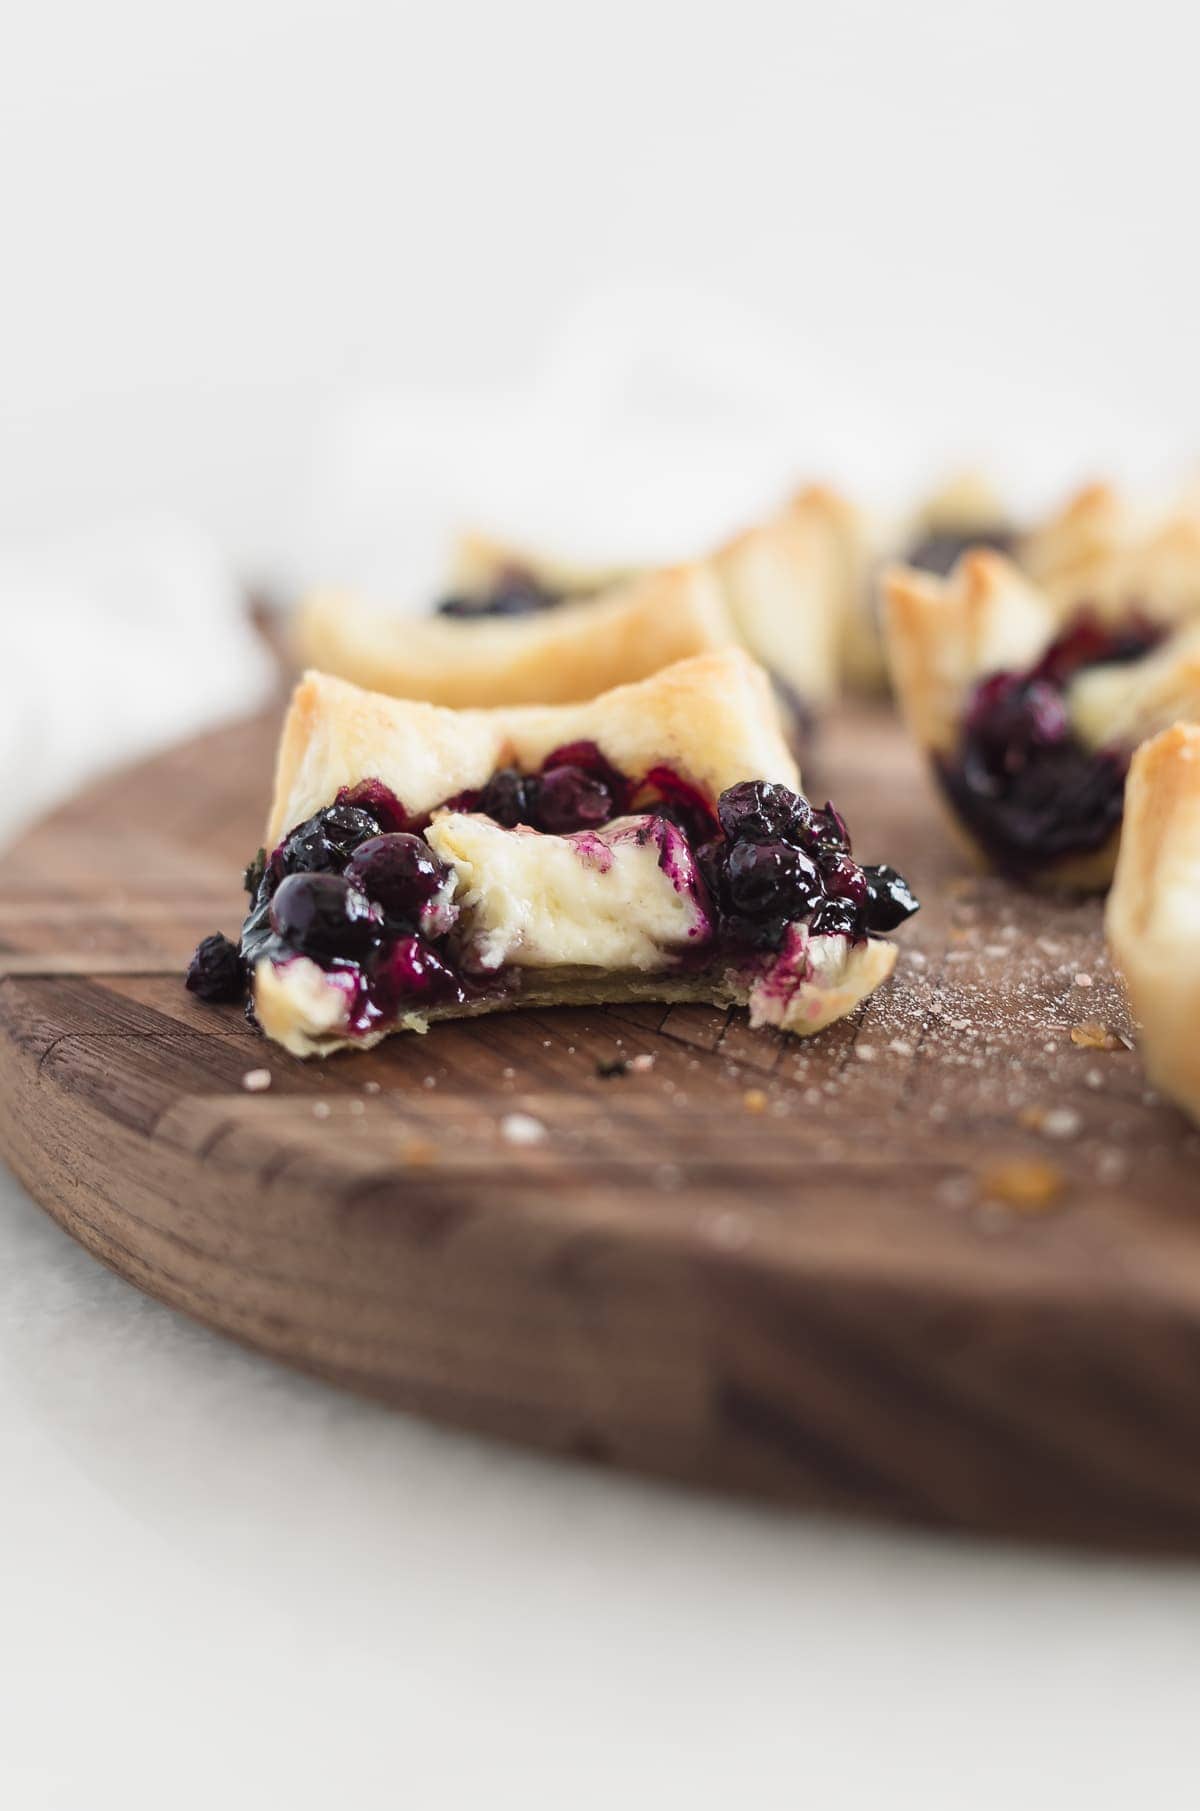 Wild Blueberry and Brie Puff Pastry Bites are the perfect appetizers for any holiday gathering. With only 5 ingredients and filled with gooey brie and wild blueberries, they're sure to please all of your guests this Thanksgiving or Christmas! (vegetarian)| sponsored by Wild Blueberries | via livelytable.com